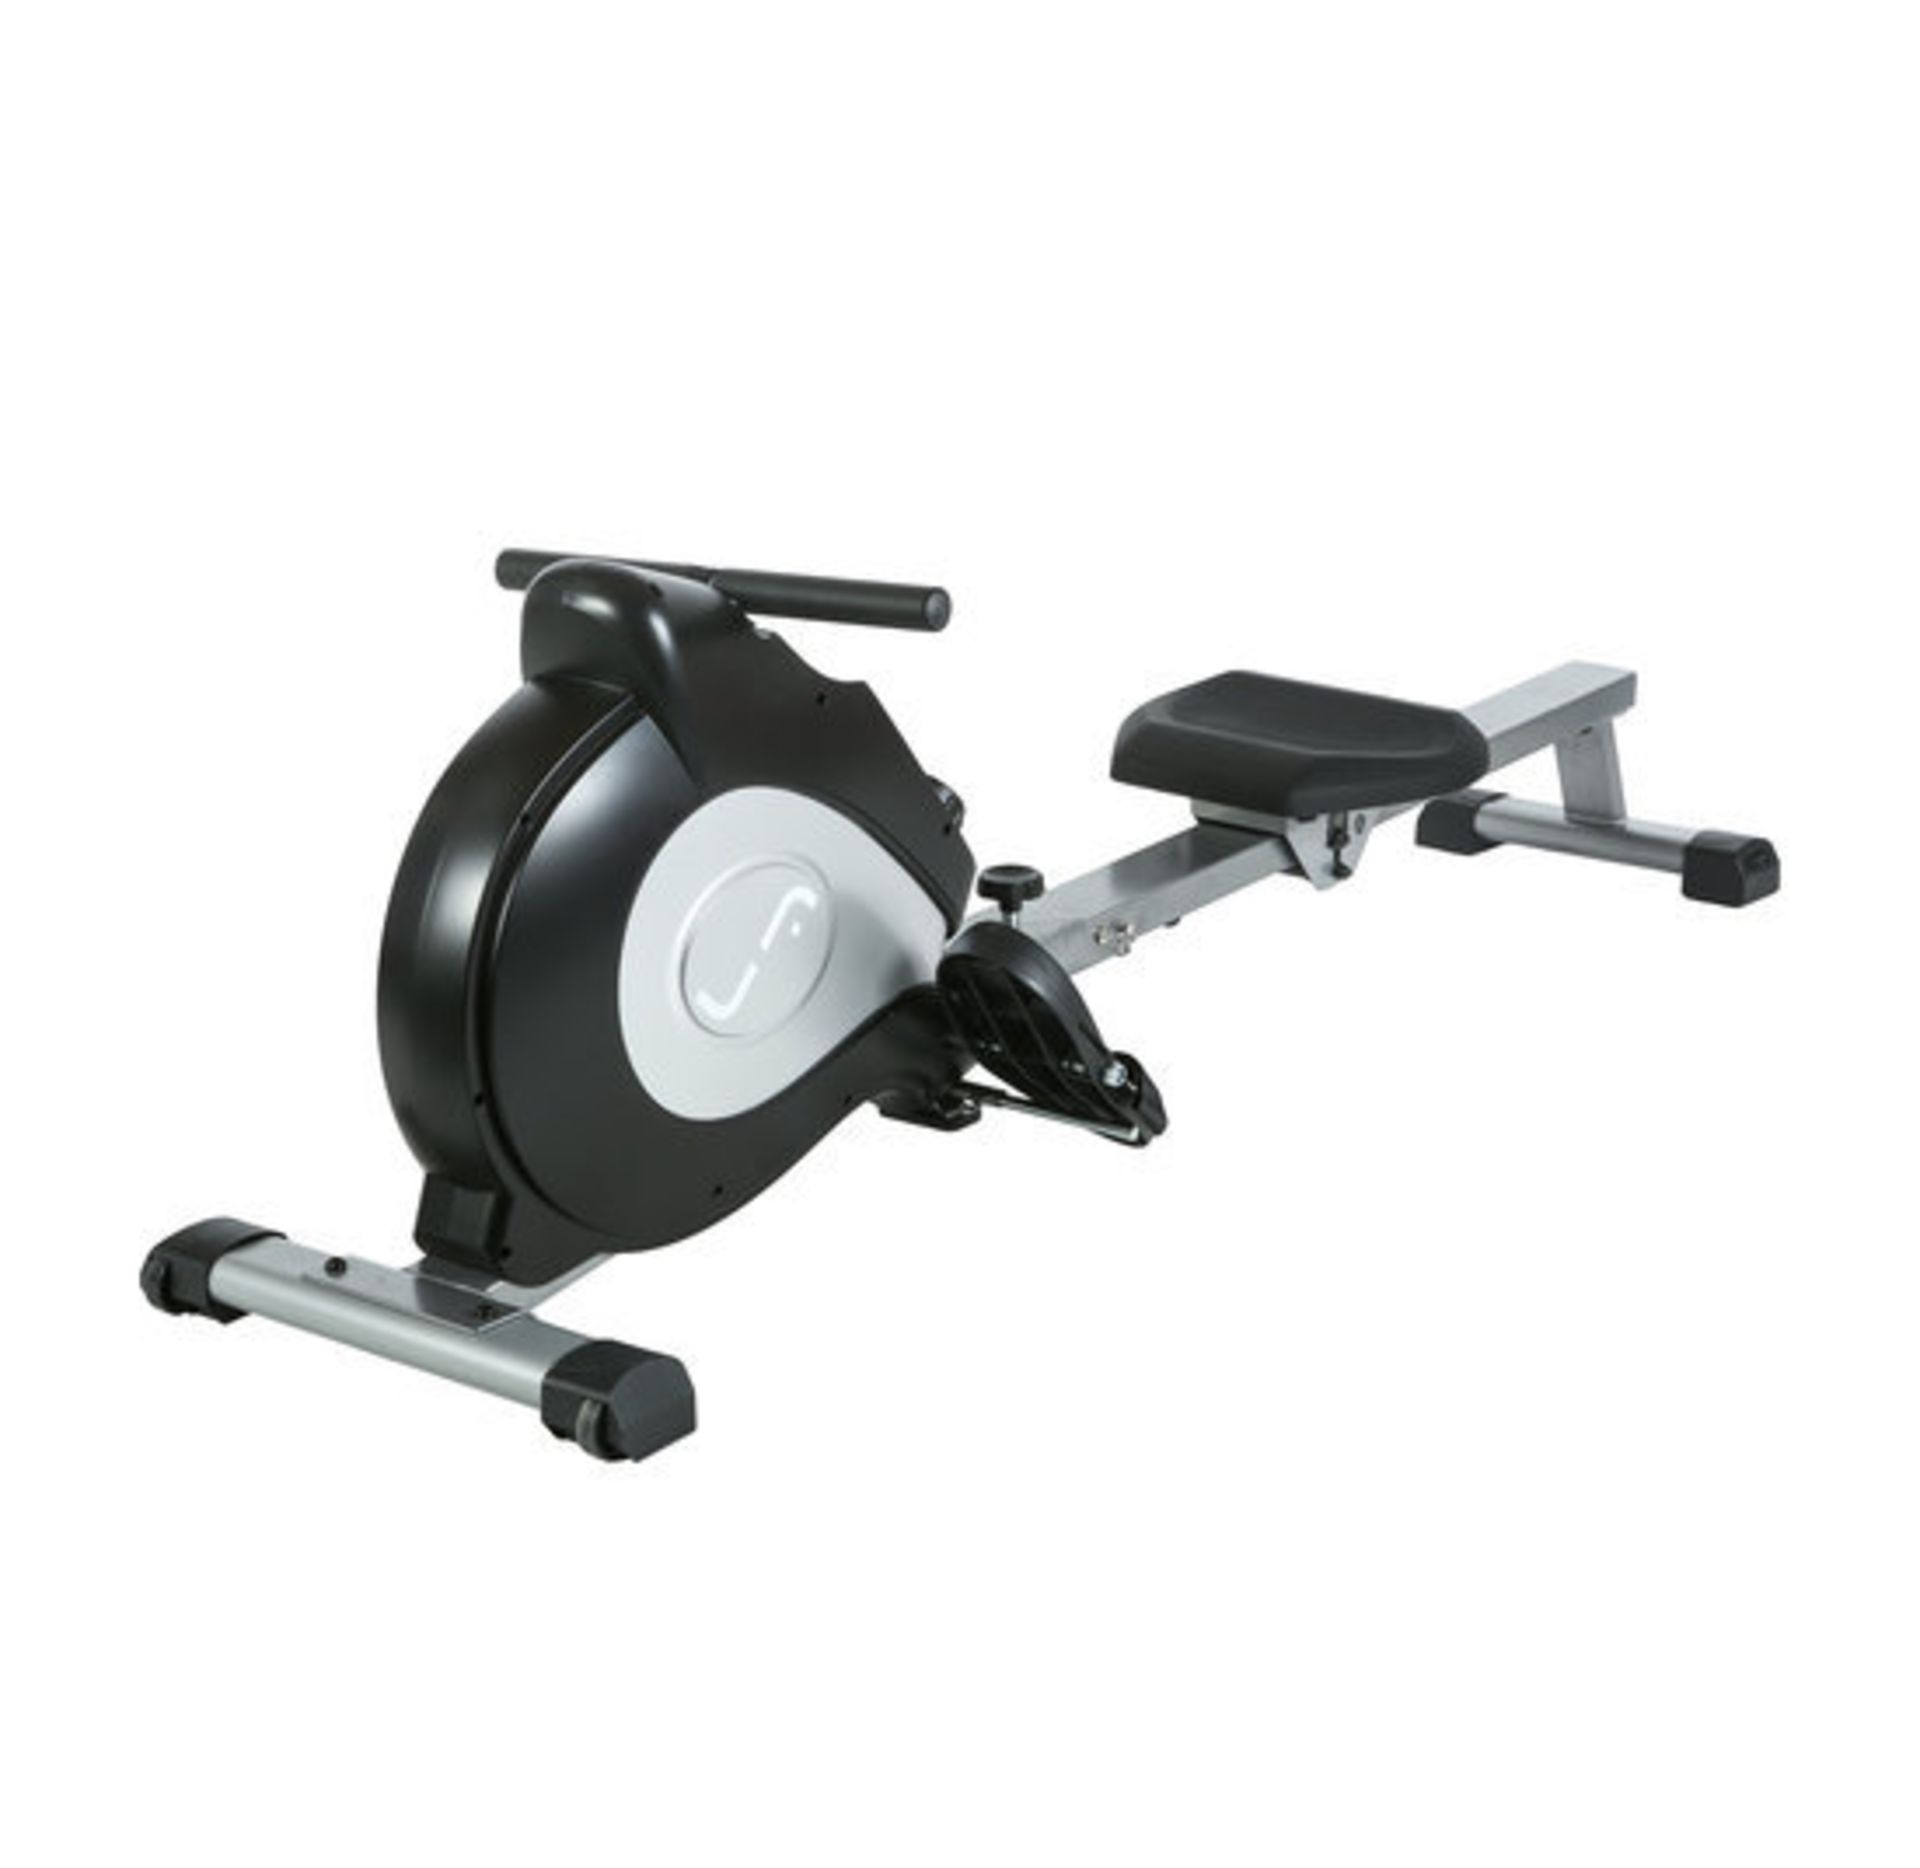 BRAND NEW ROWFIT-2.5 FOLDABLE ROWING MACHINE - *** RRP £248 *** - Image 2 of 4